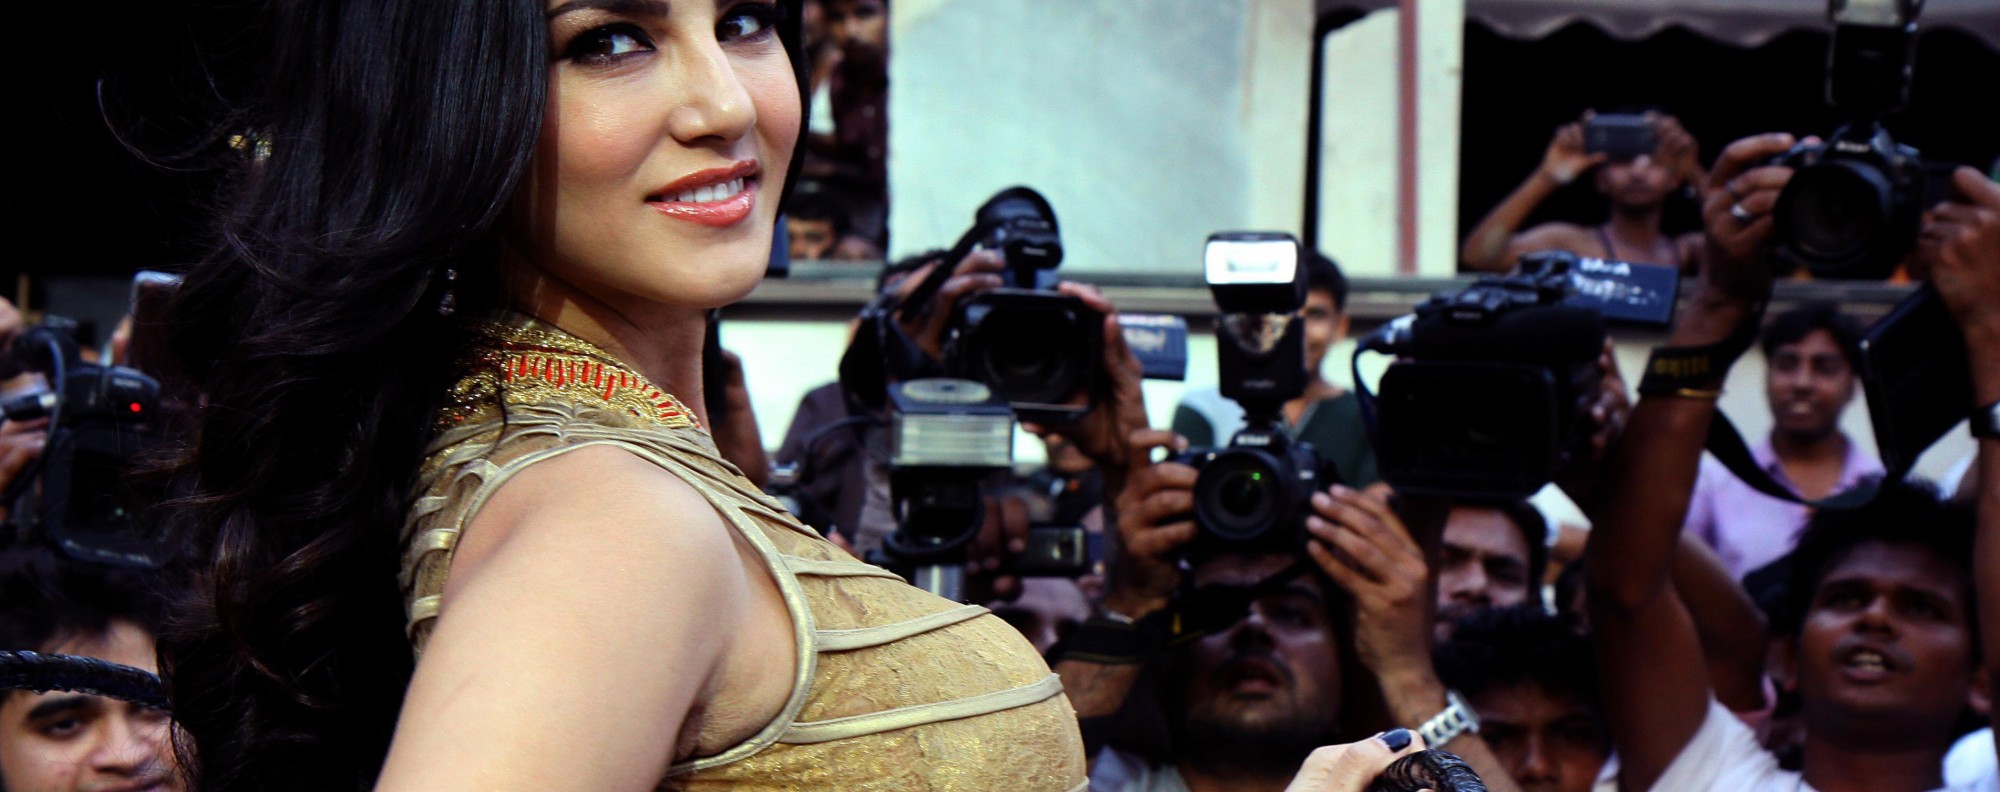 Rex Porn Sunny Leone - Uncovered: American porn star Sunny Leone's amazing journey to Bollywood  fame | South China Morning Post